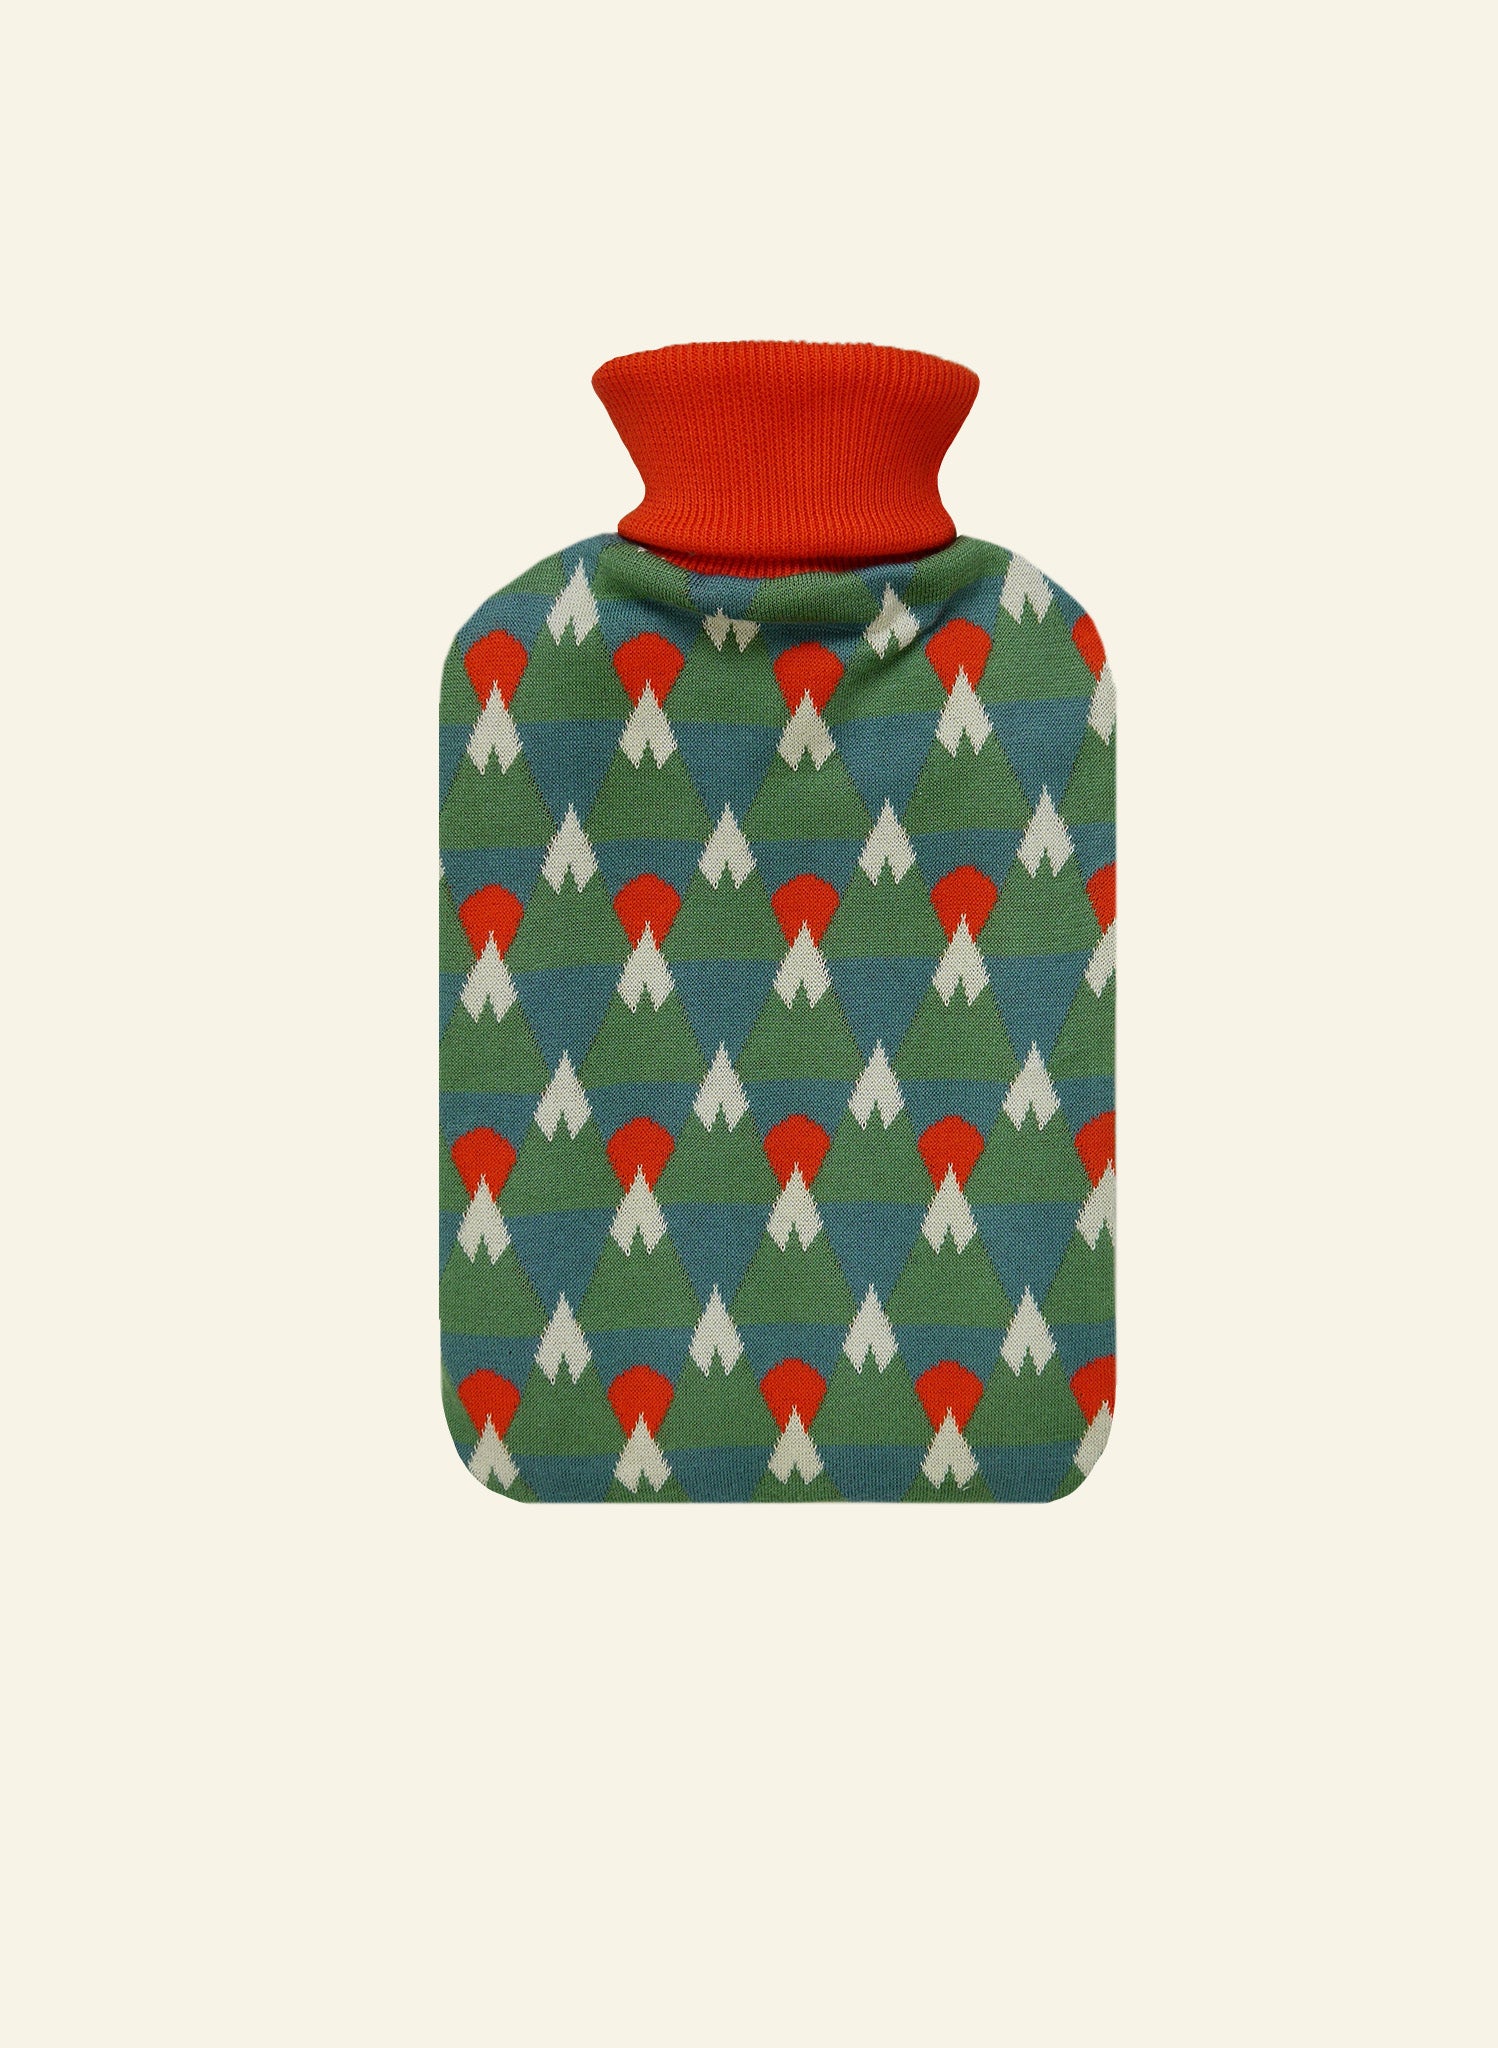 Hot Water Bottle Cover - Green Mountains